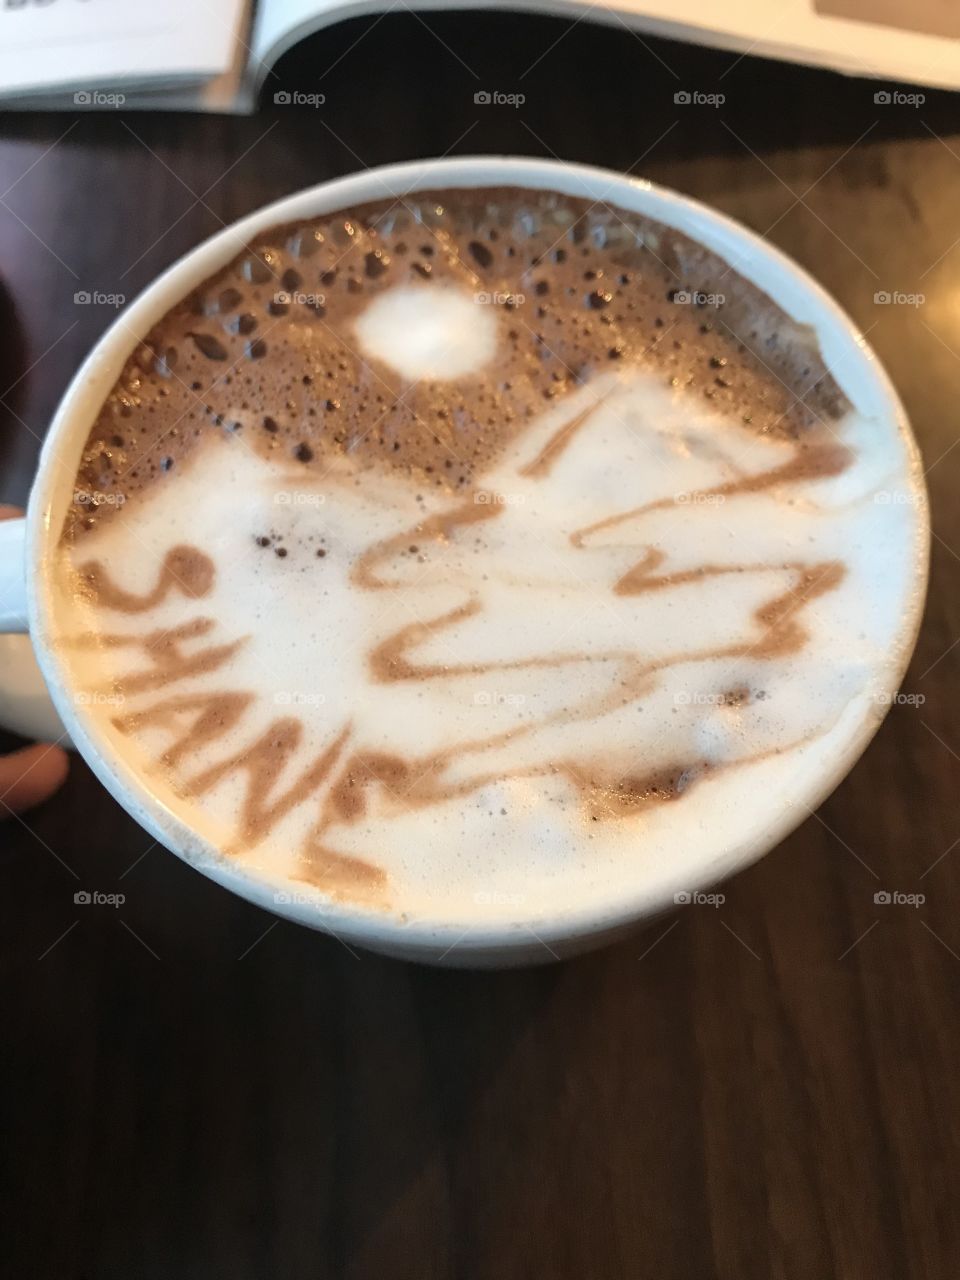 My father ordered a cup of coffee at liquid planet. Being that we live in Montana they drew the mountains. 👍🏻